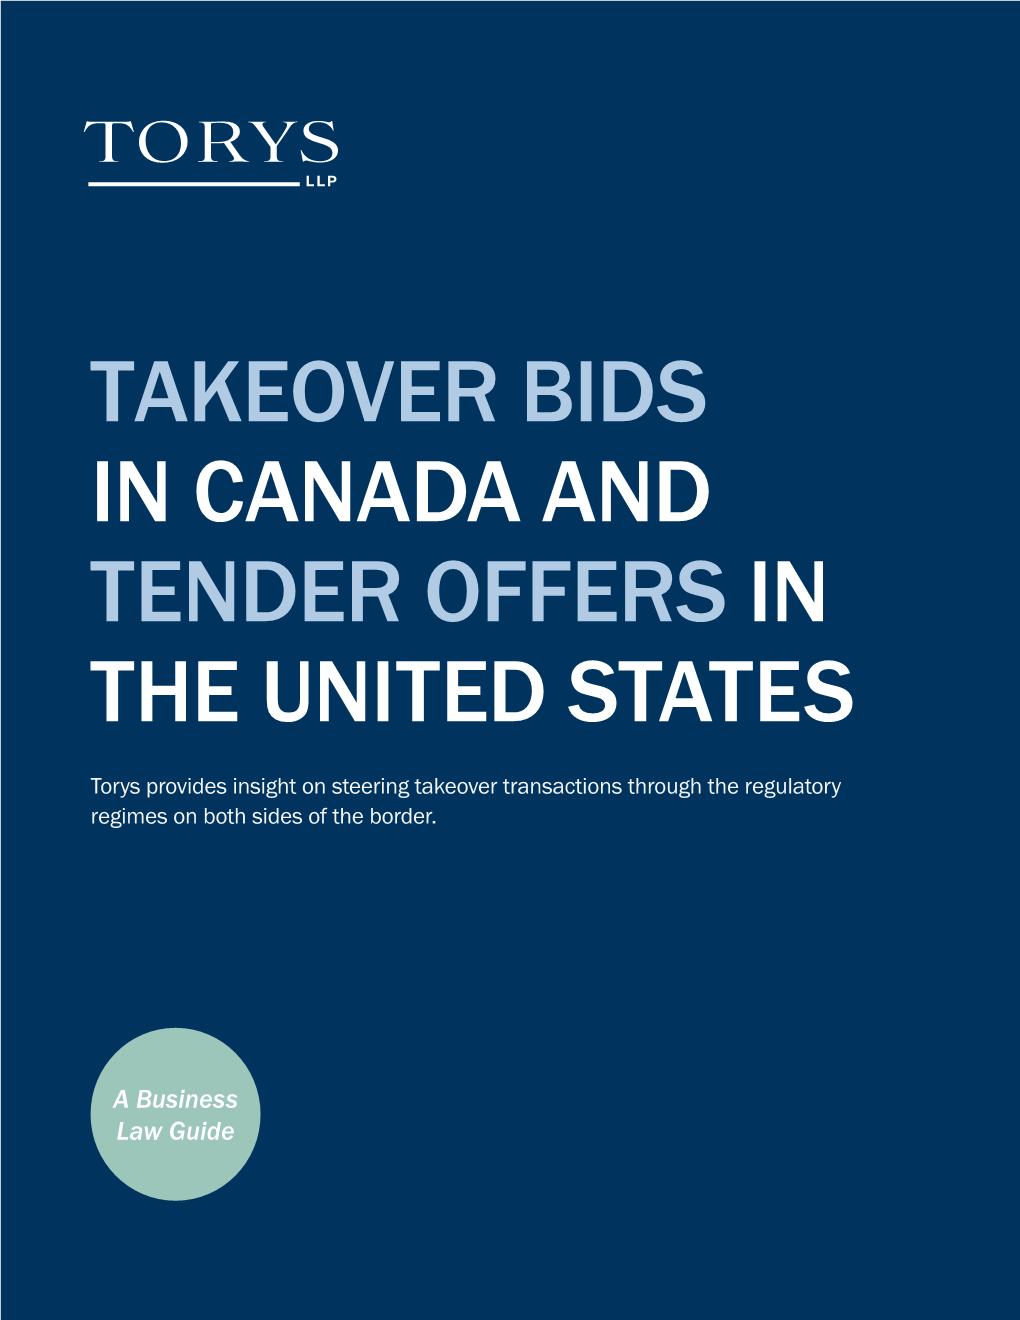 Takeover Bids in Canada and Tender Offers in the United States